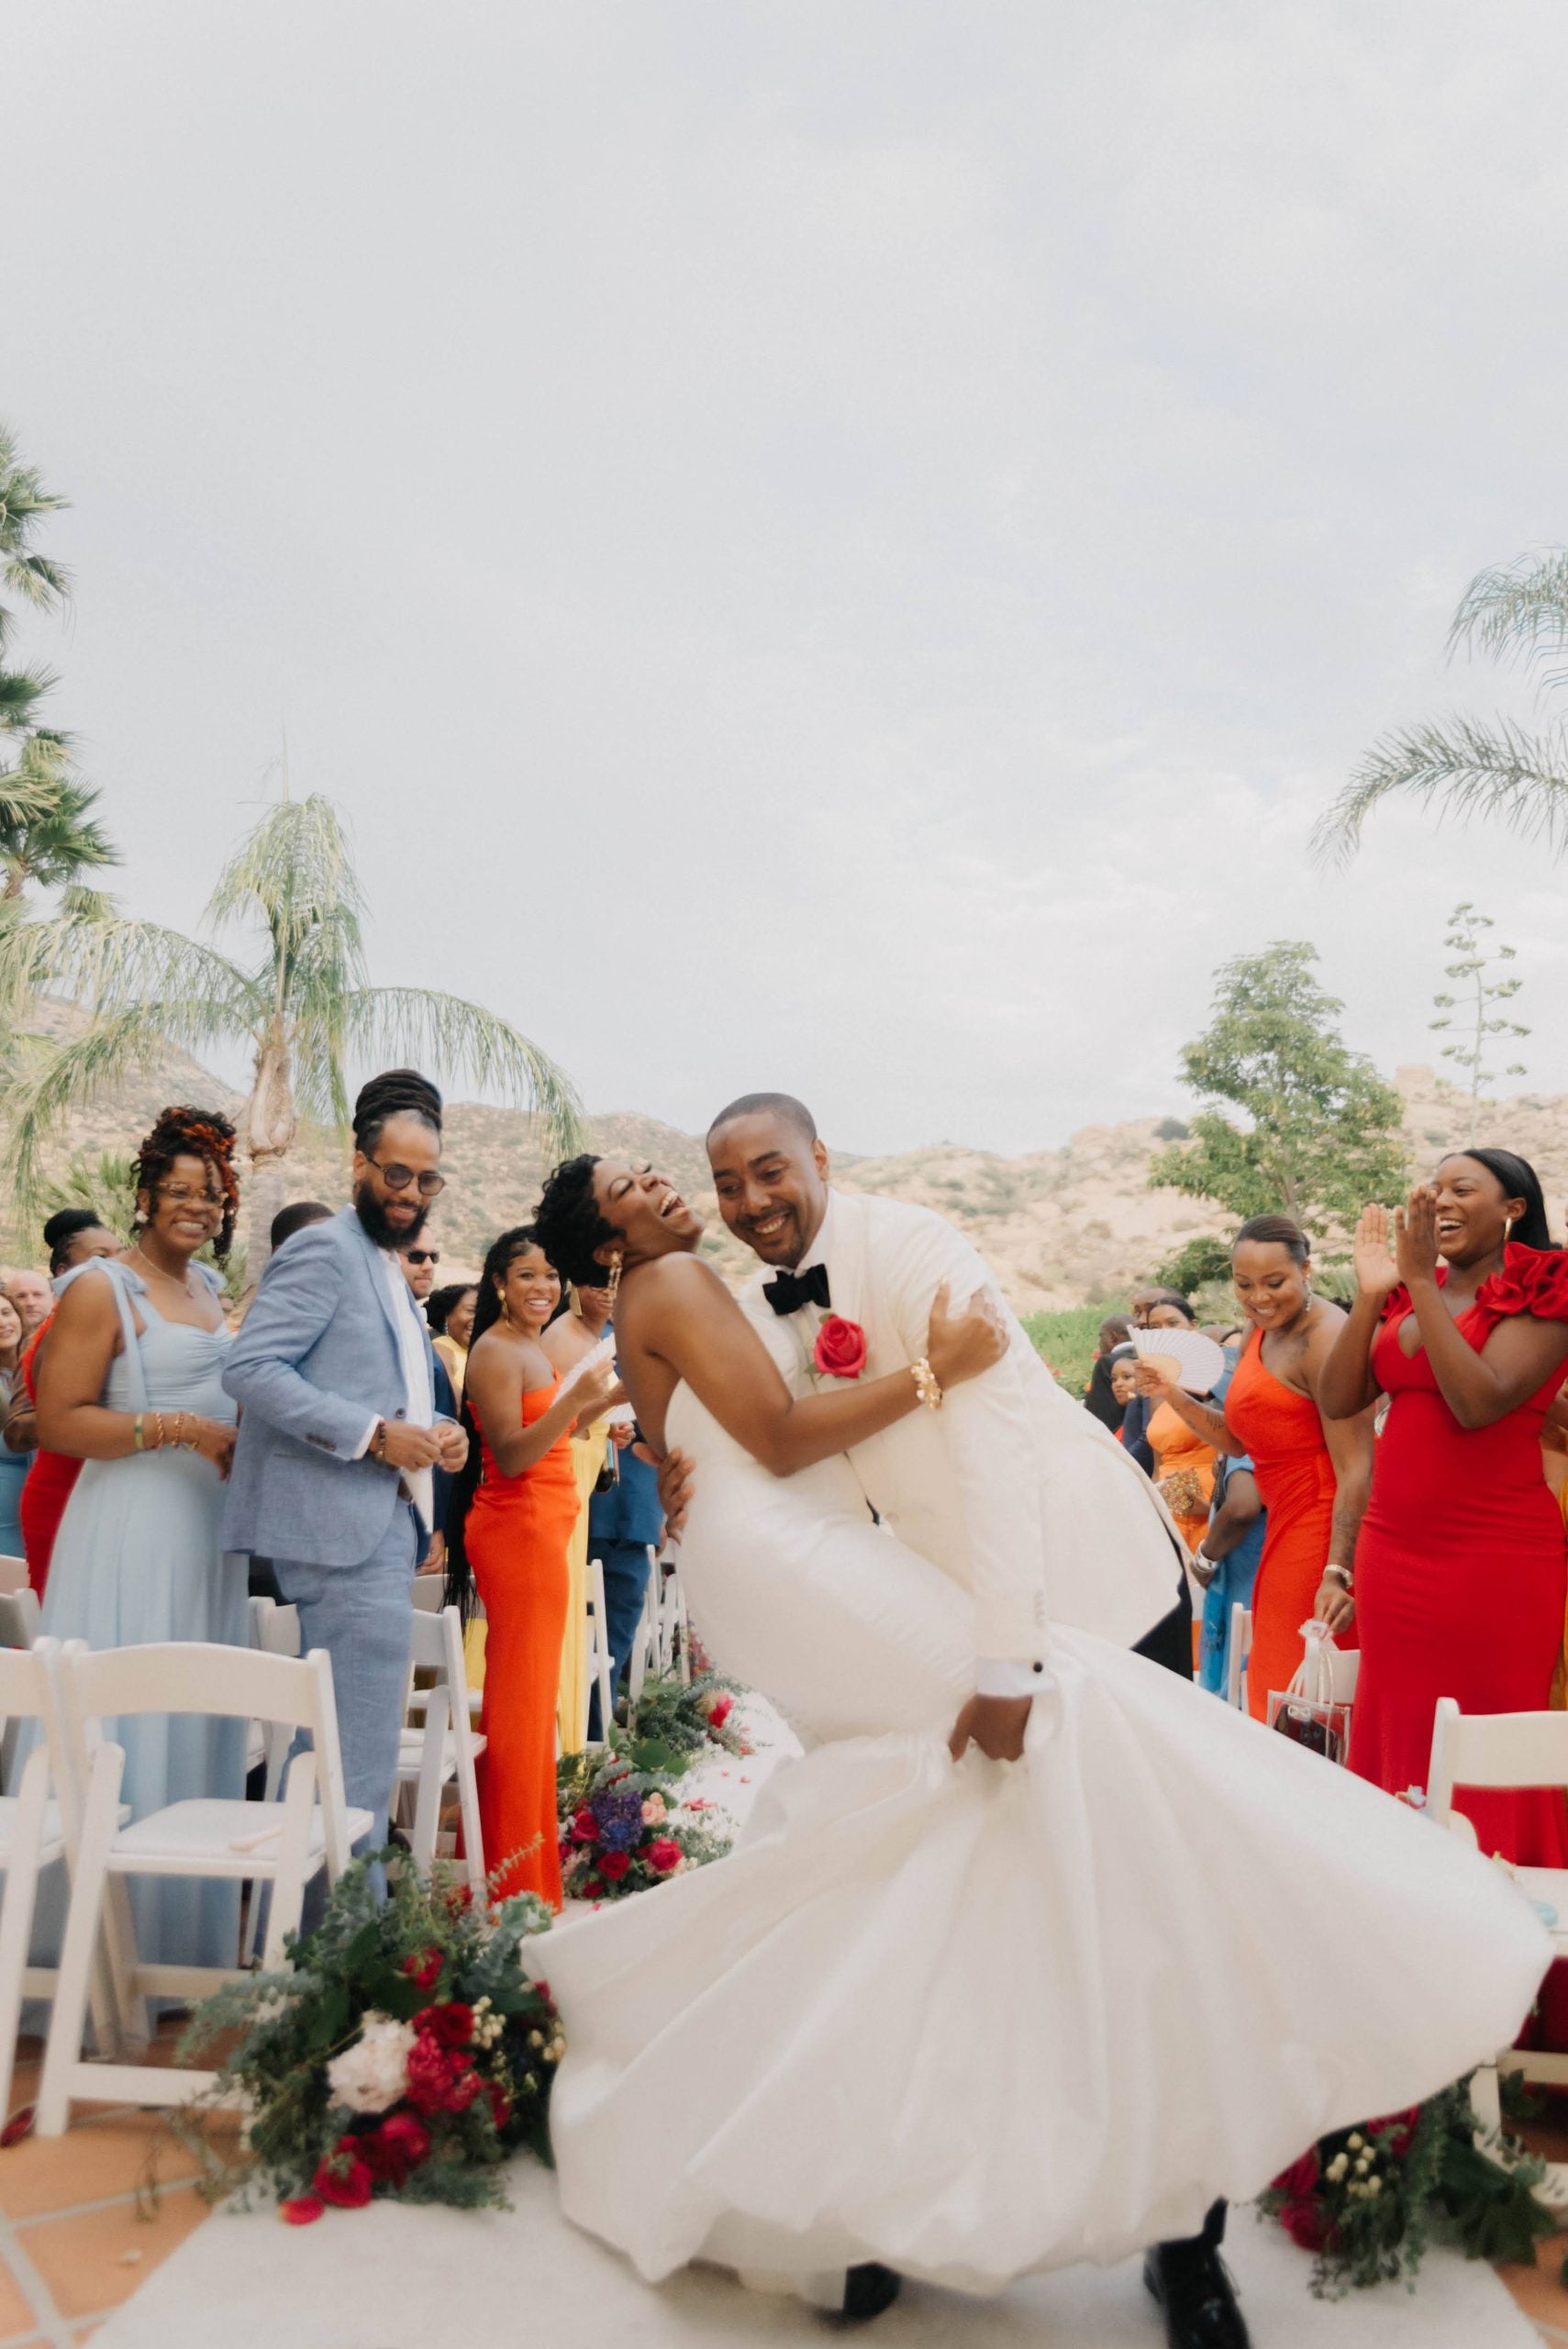 The Best Of Bridal Bliss: Our Favorite Images Of Black Love In 2023